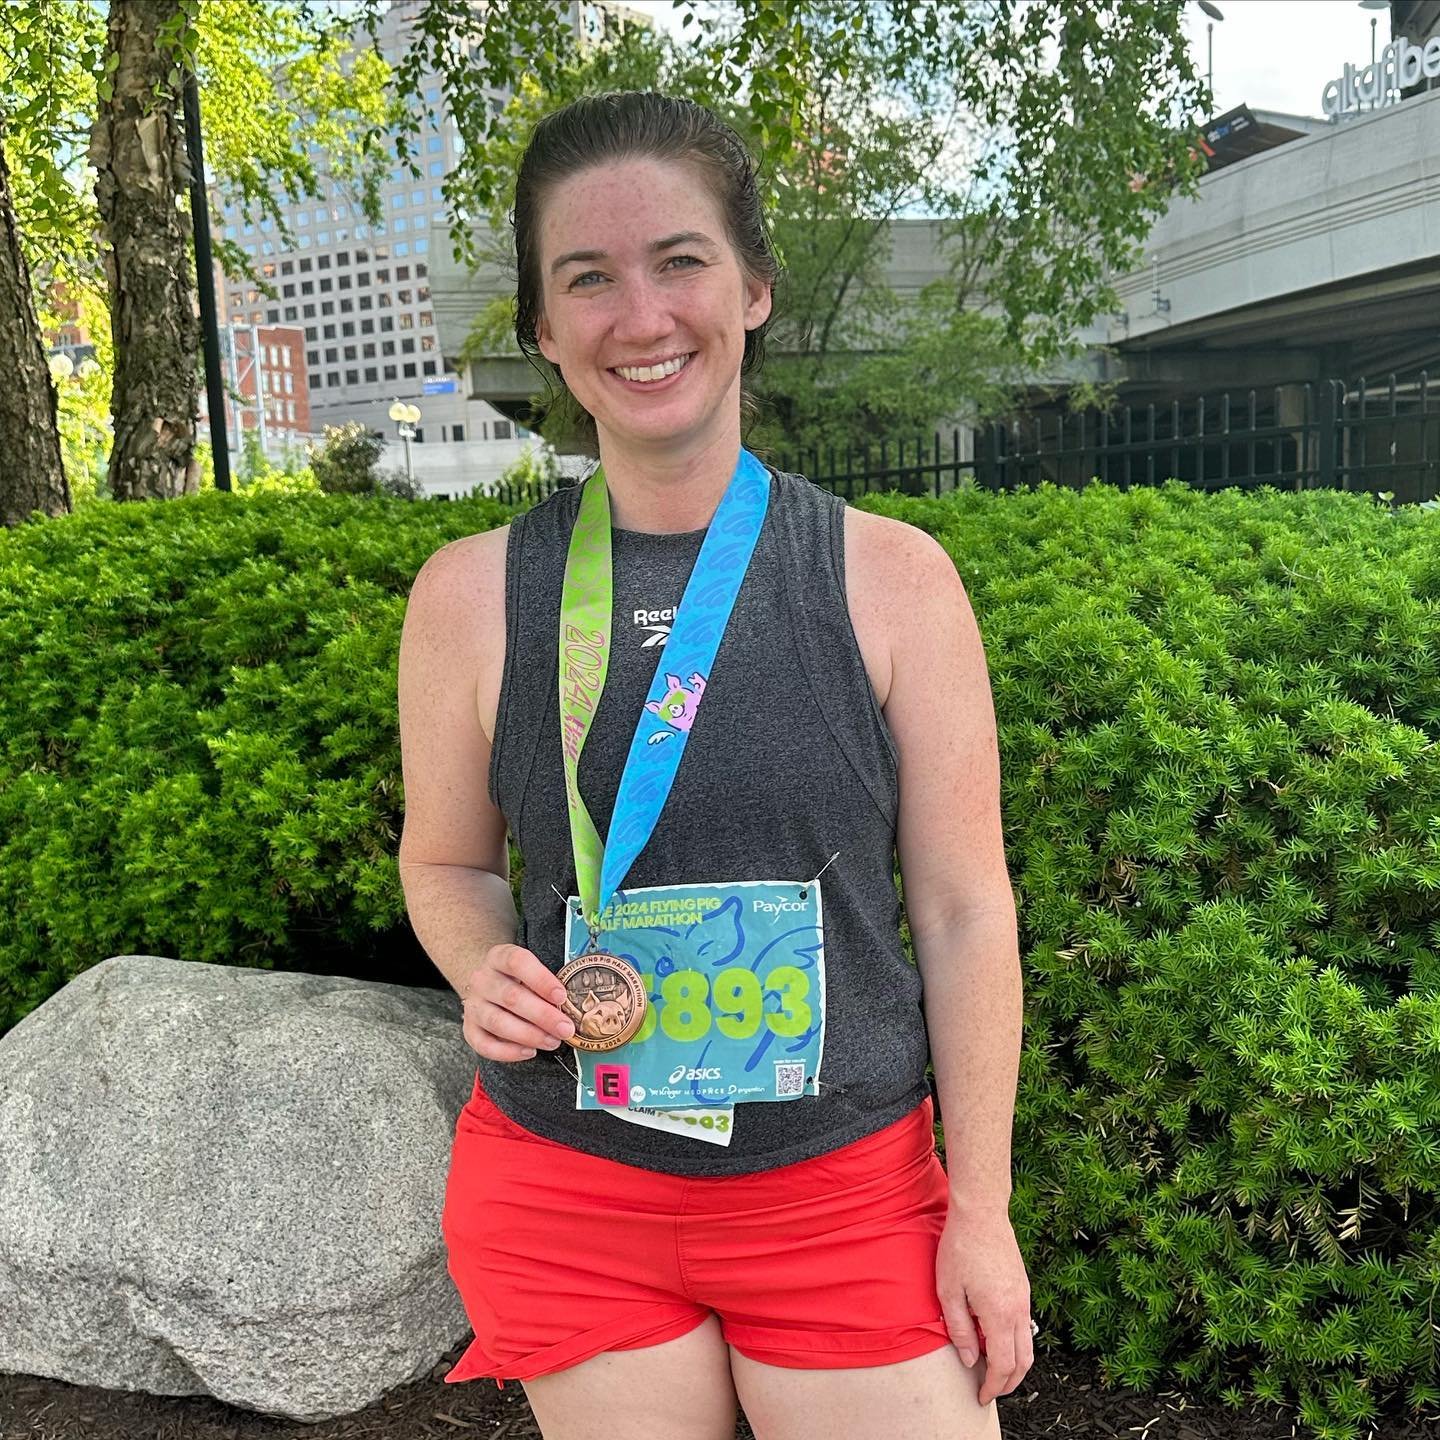 Flying Pig Half Marathon Recap 2024 👇🏻

My husband bought me tickets for the Stardew Valley orchestra in Cincinnati as my Christmas gift. So naturally, when I realized a race was going to be the same weekend we were going to be there, I signed us u